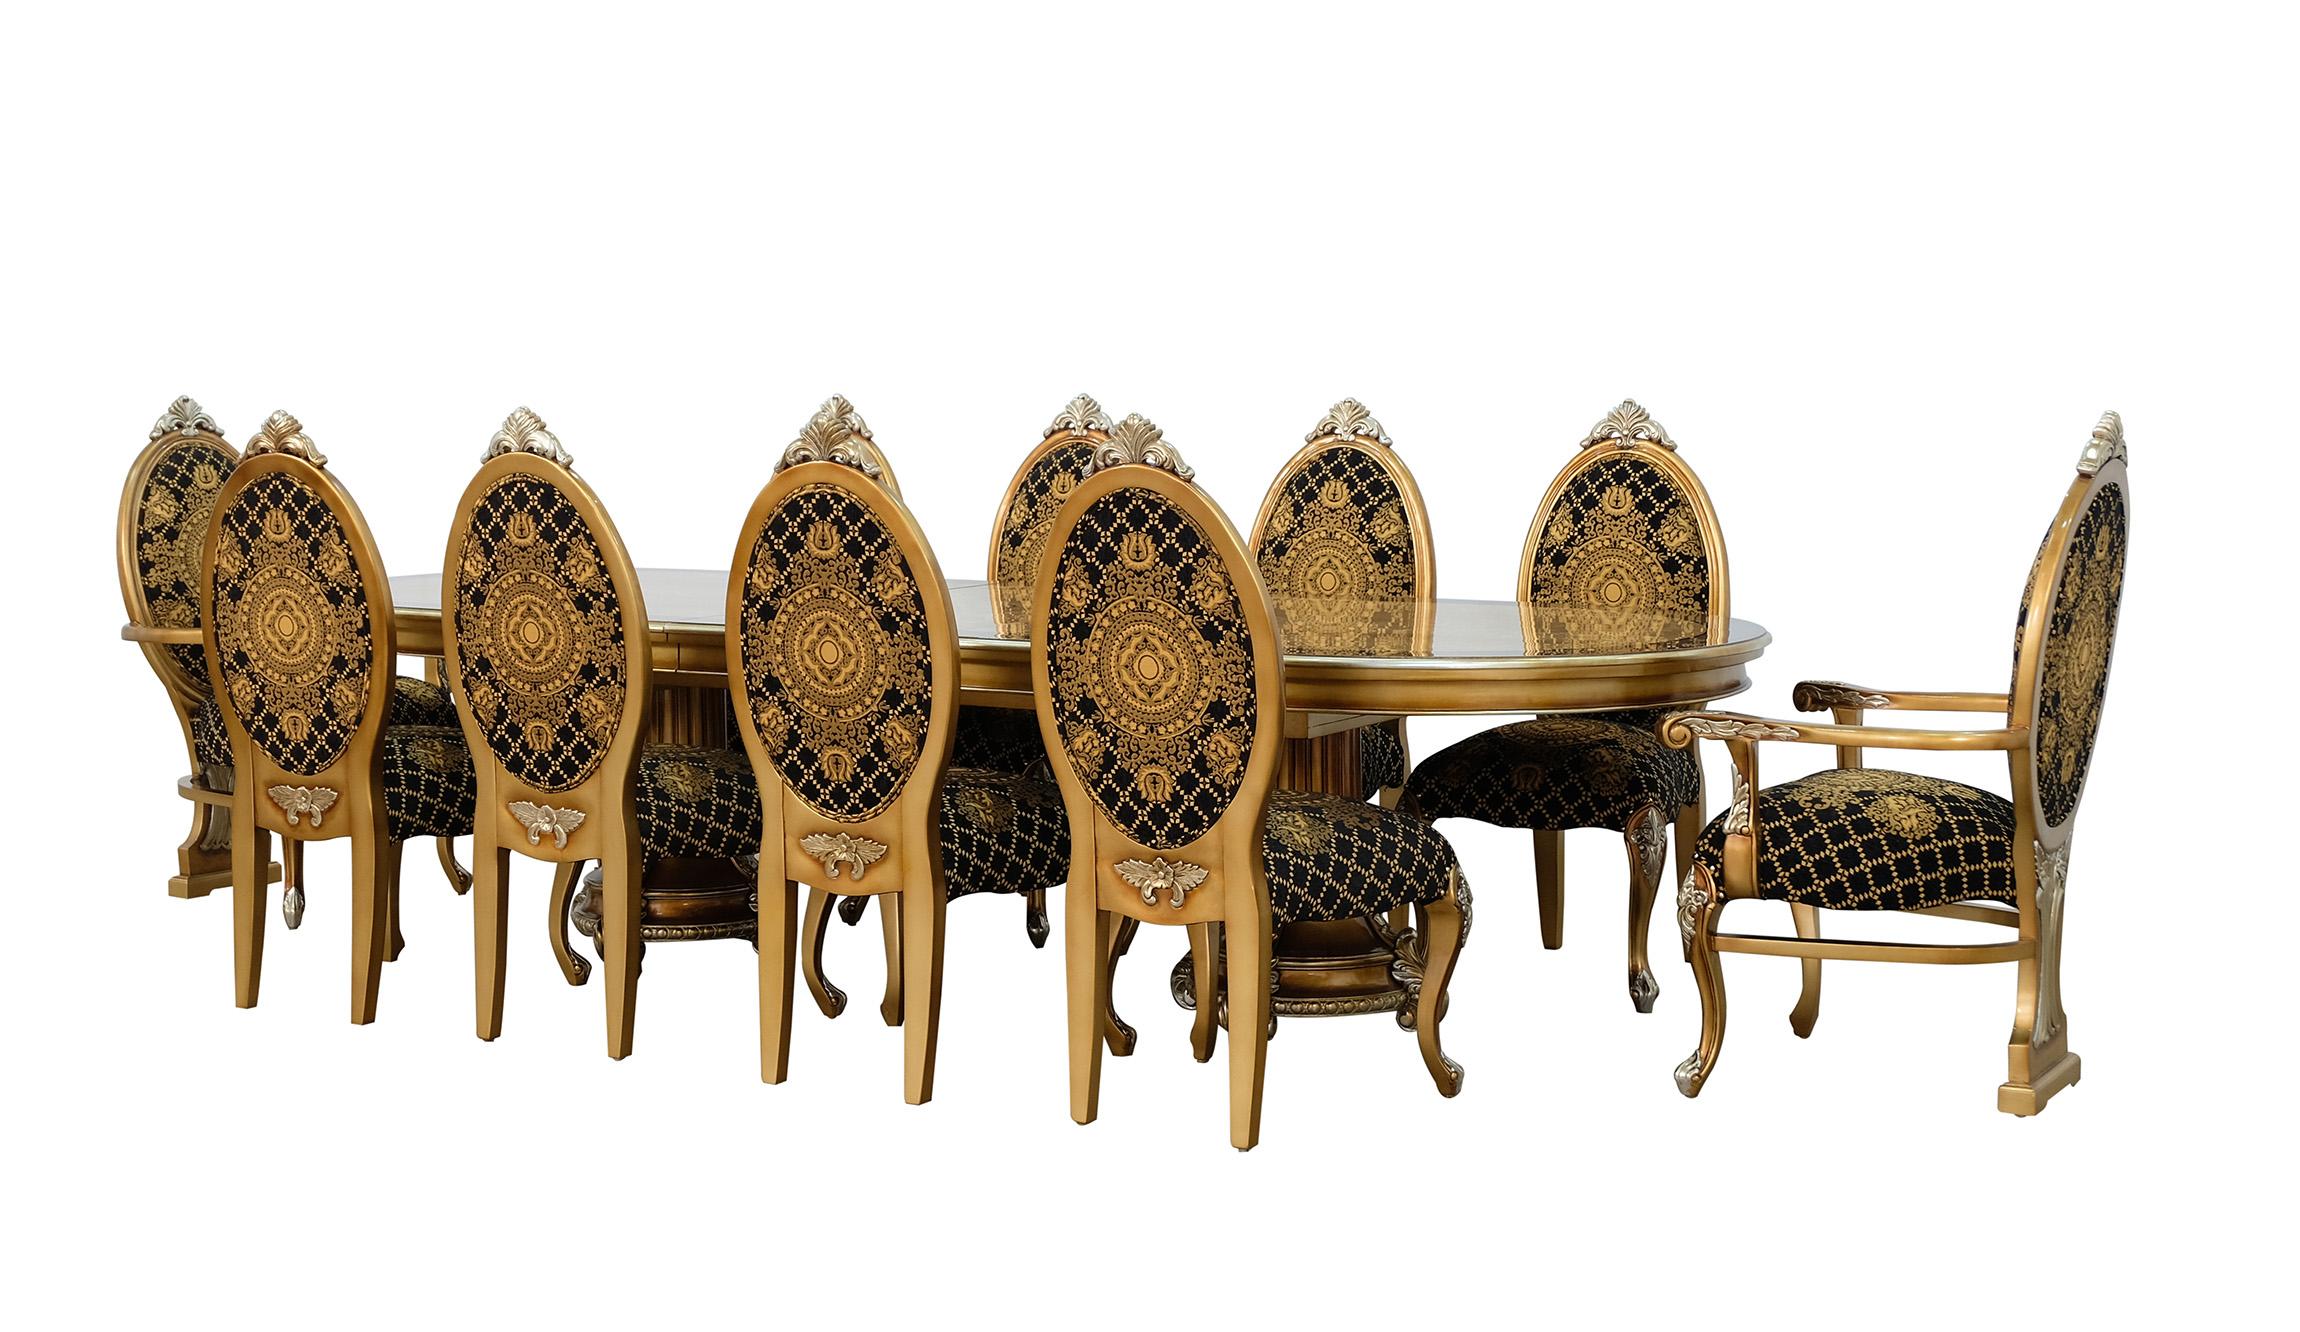 Classic, Traditional Dining Table Set EMPERADOR 42034-DT-Set-11 in Ebony, Silver, Brown Fabric